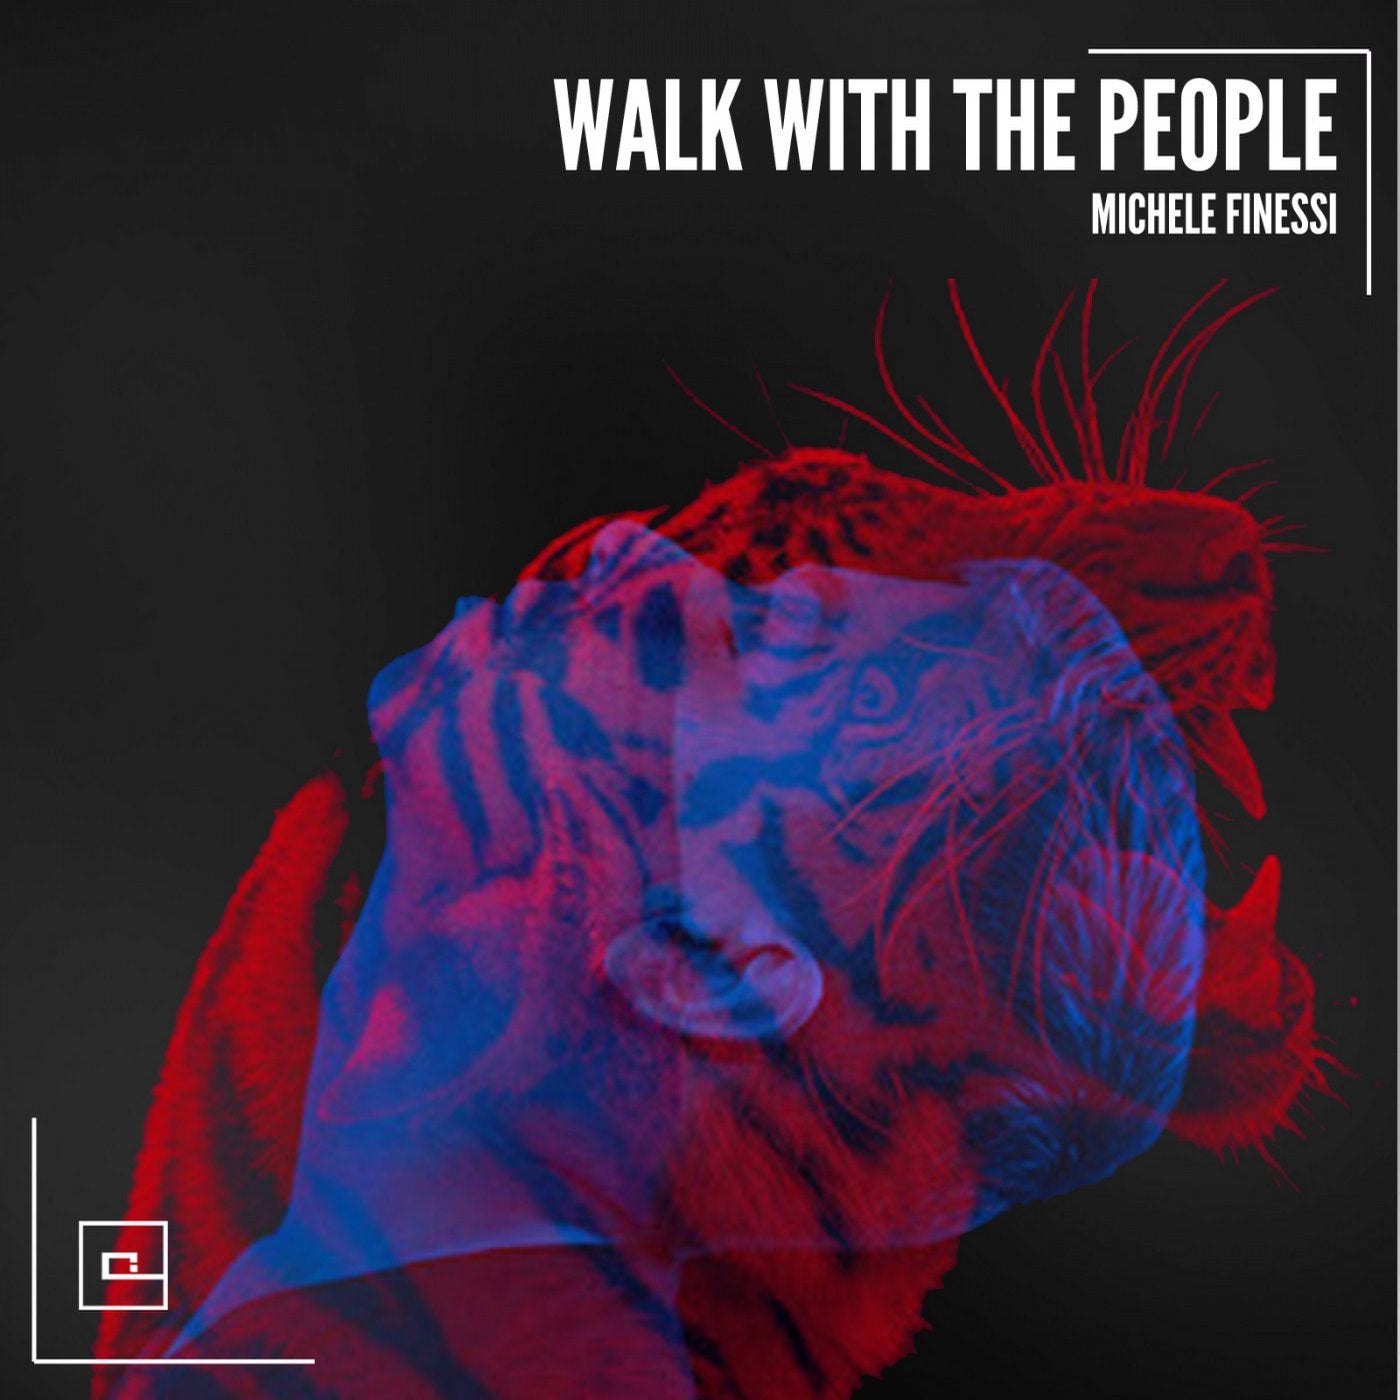 Walk with the people